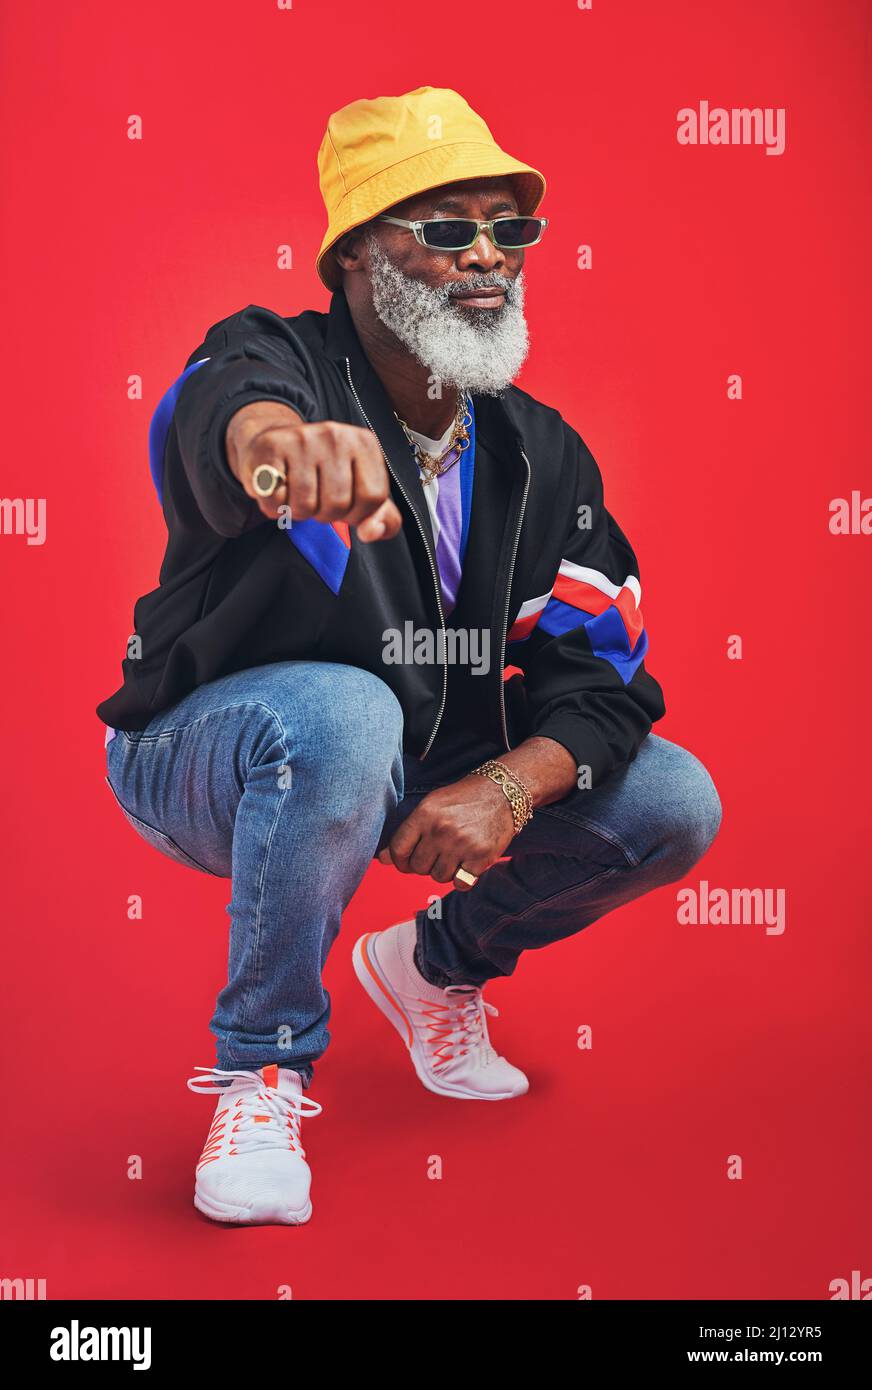 In order to be irreplaceable, one must always be different. Studio shot of a senior man wearing retro attire while posing against a red background. Stock Photo